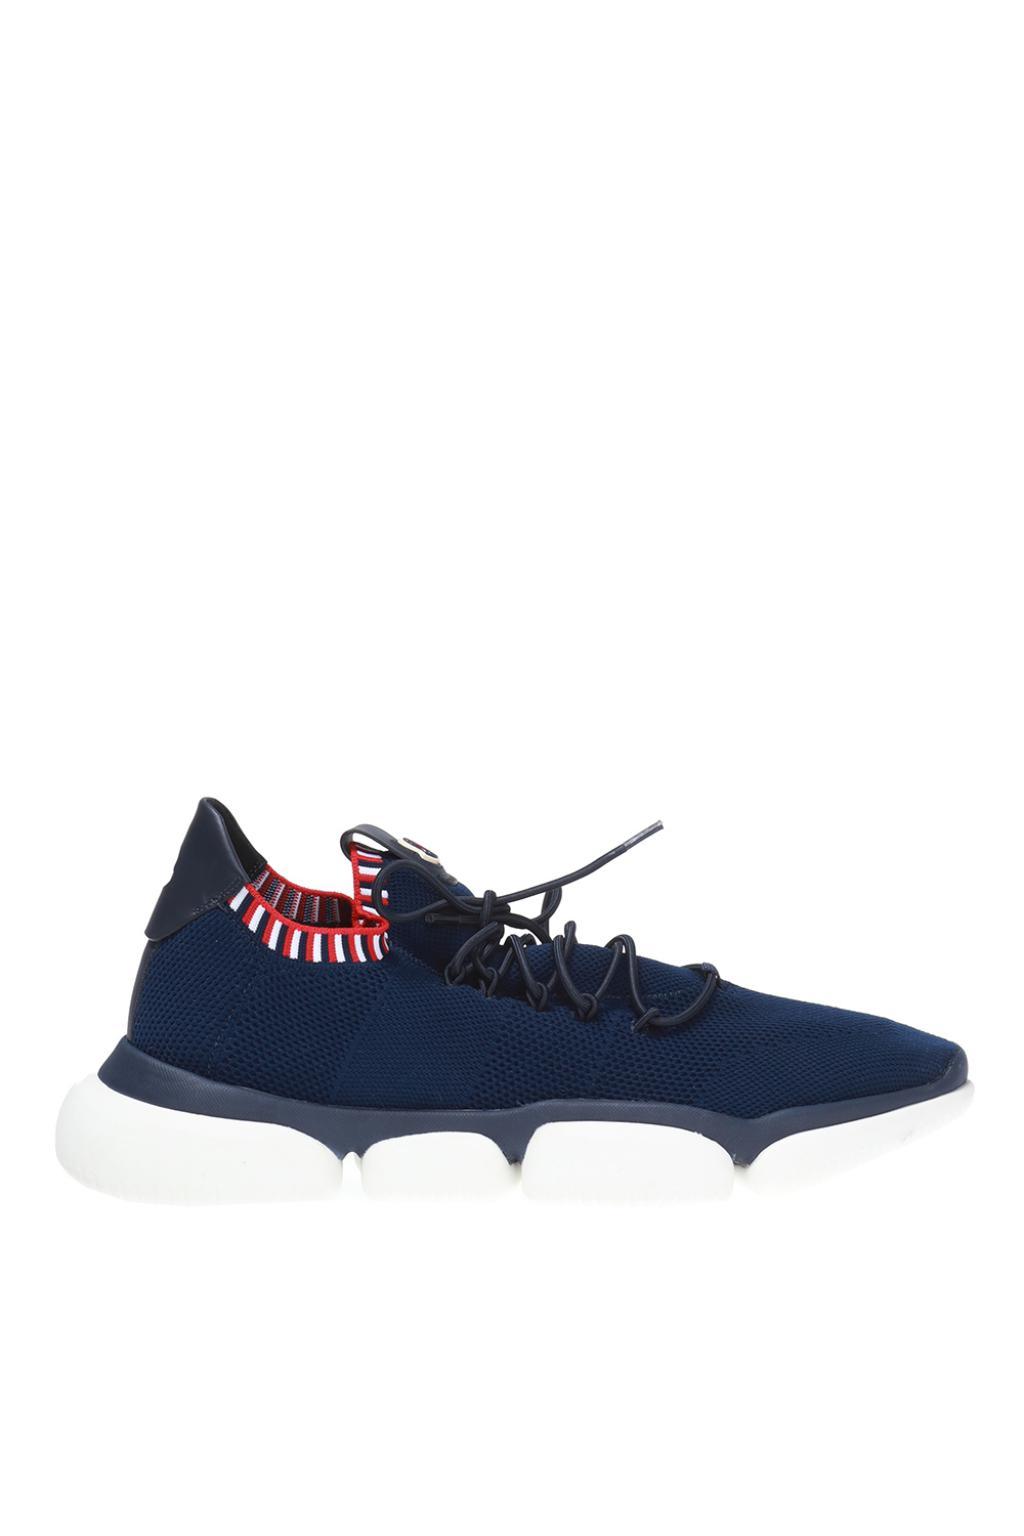 Moncler Rubber 'the Bubble' Sneakers Navy Blue for Men - Lyst